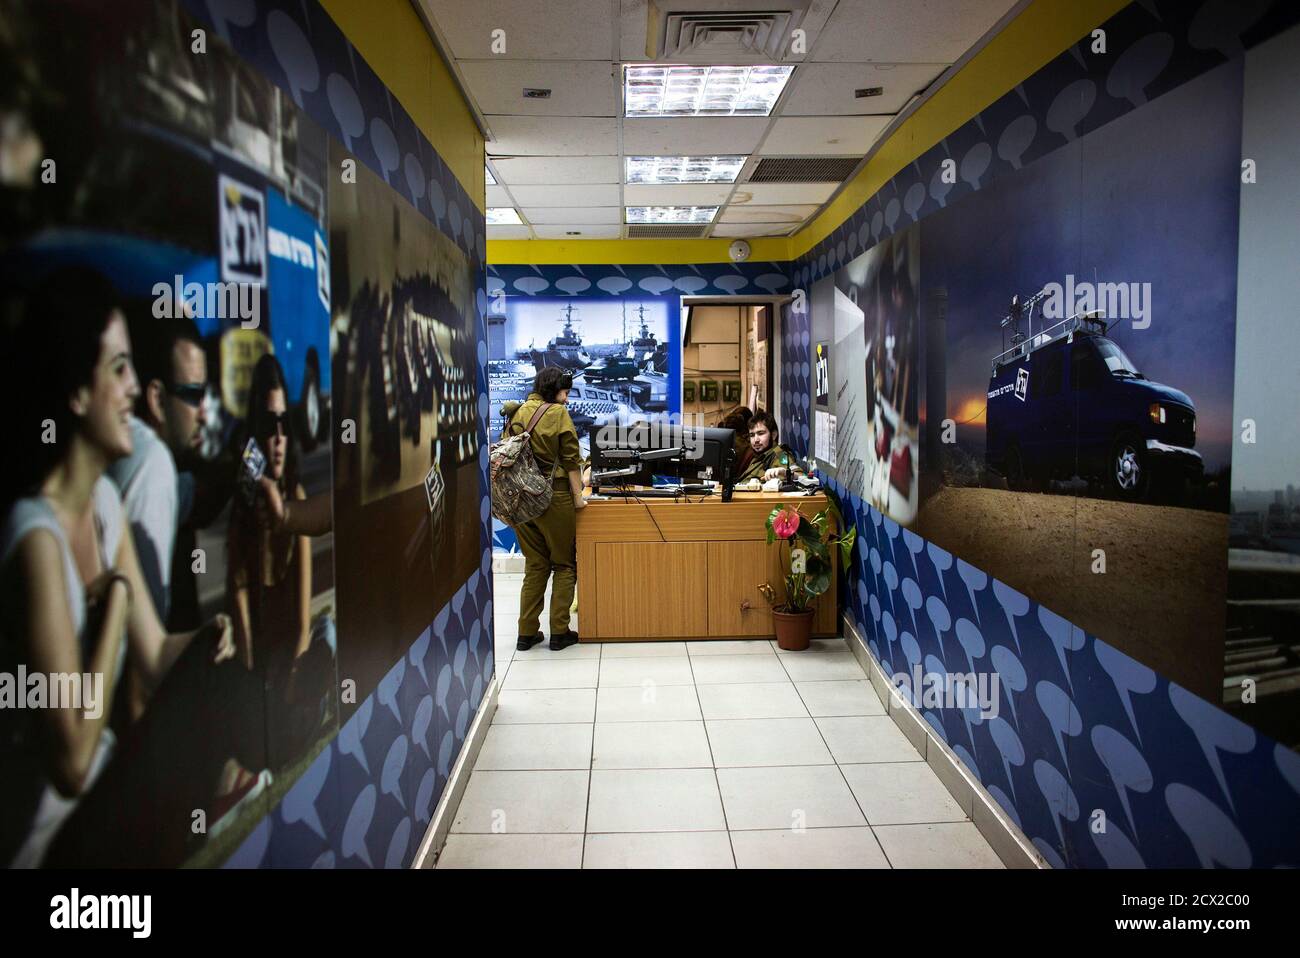 An Israeli soldier from Galei Tzahal, the Israeli army radio station,  stands at the entrance to the station's studios in Jaffa, south of central Tel  Aviv November 10, 2013. The Israeli military